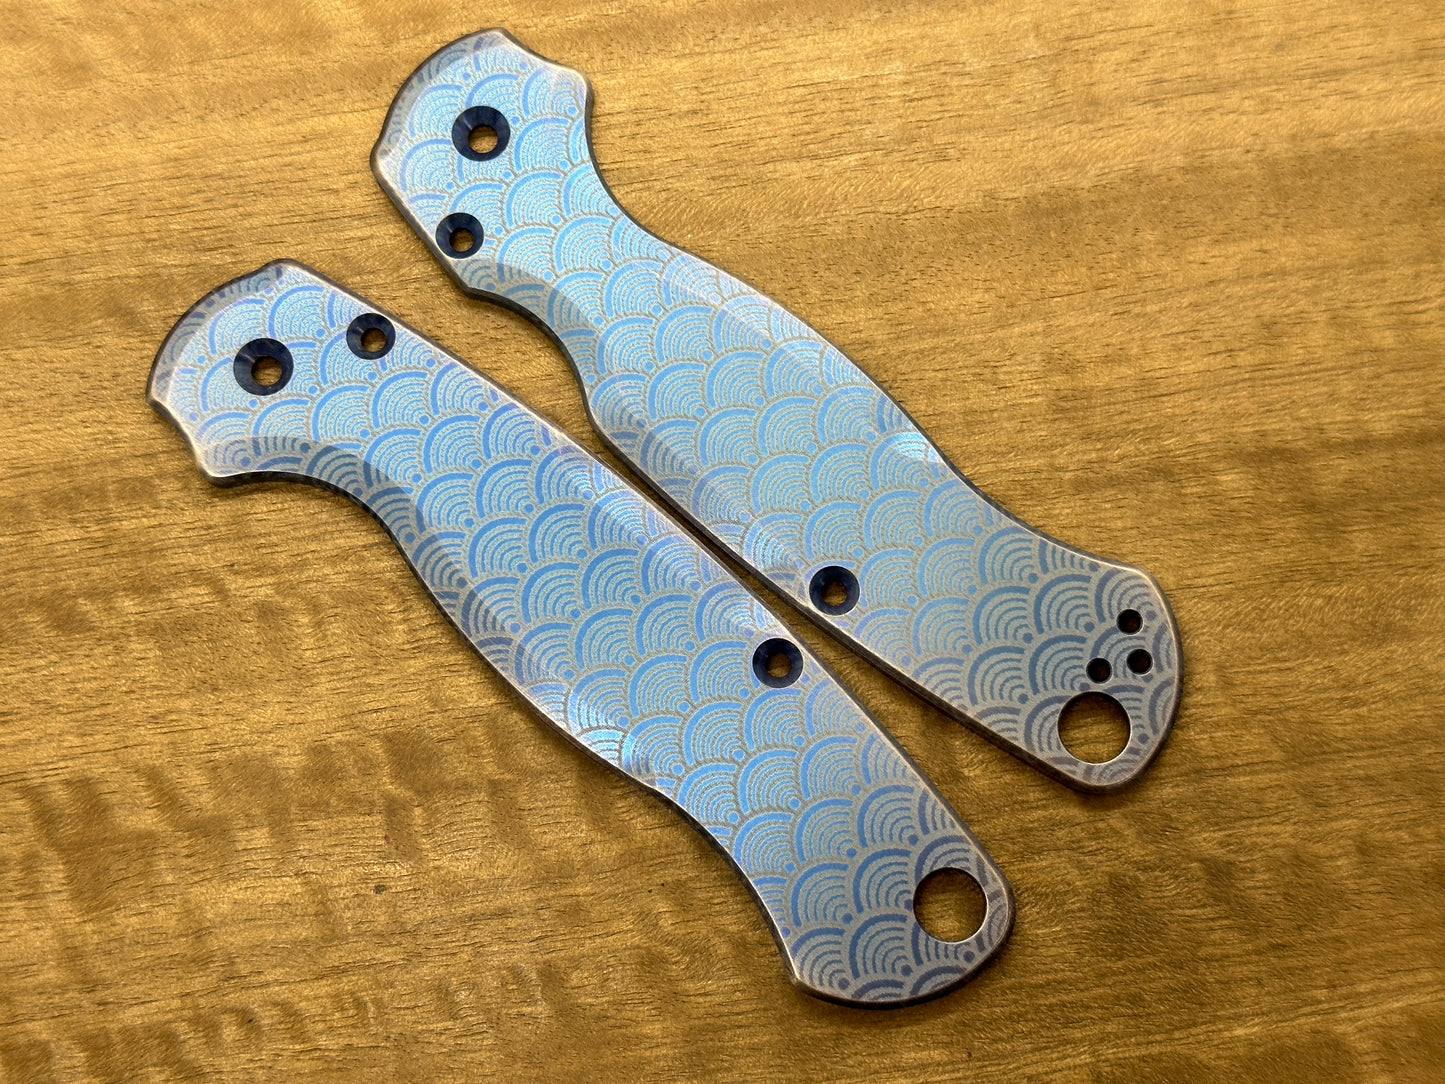 SEIGAIHA Blue Ano Brushed Titanium scales for Spyderco Paramilitary 2 PM2